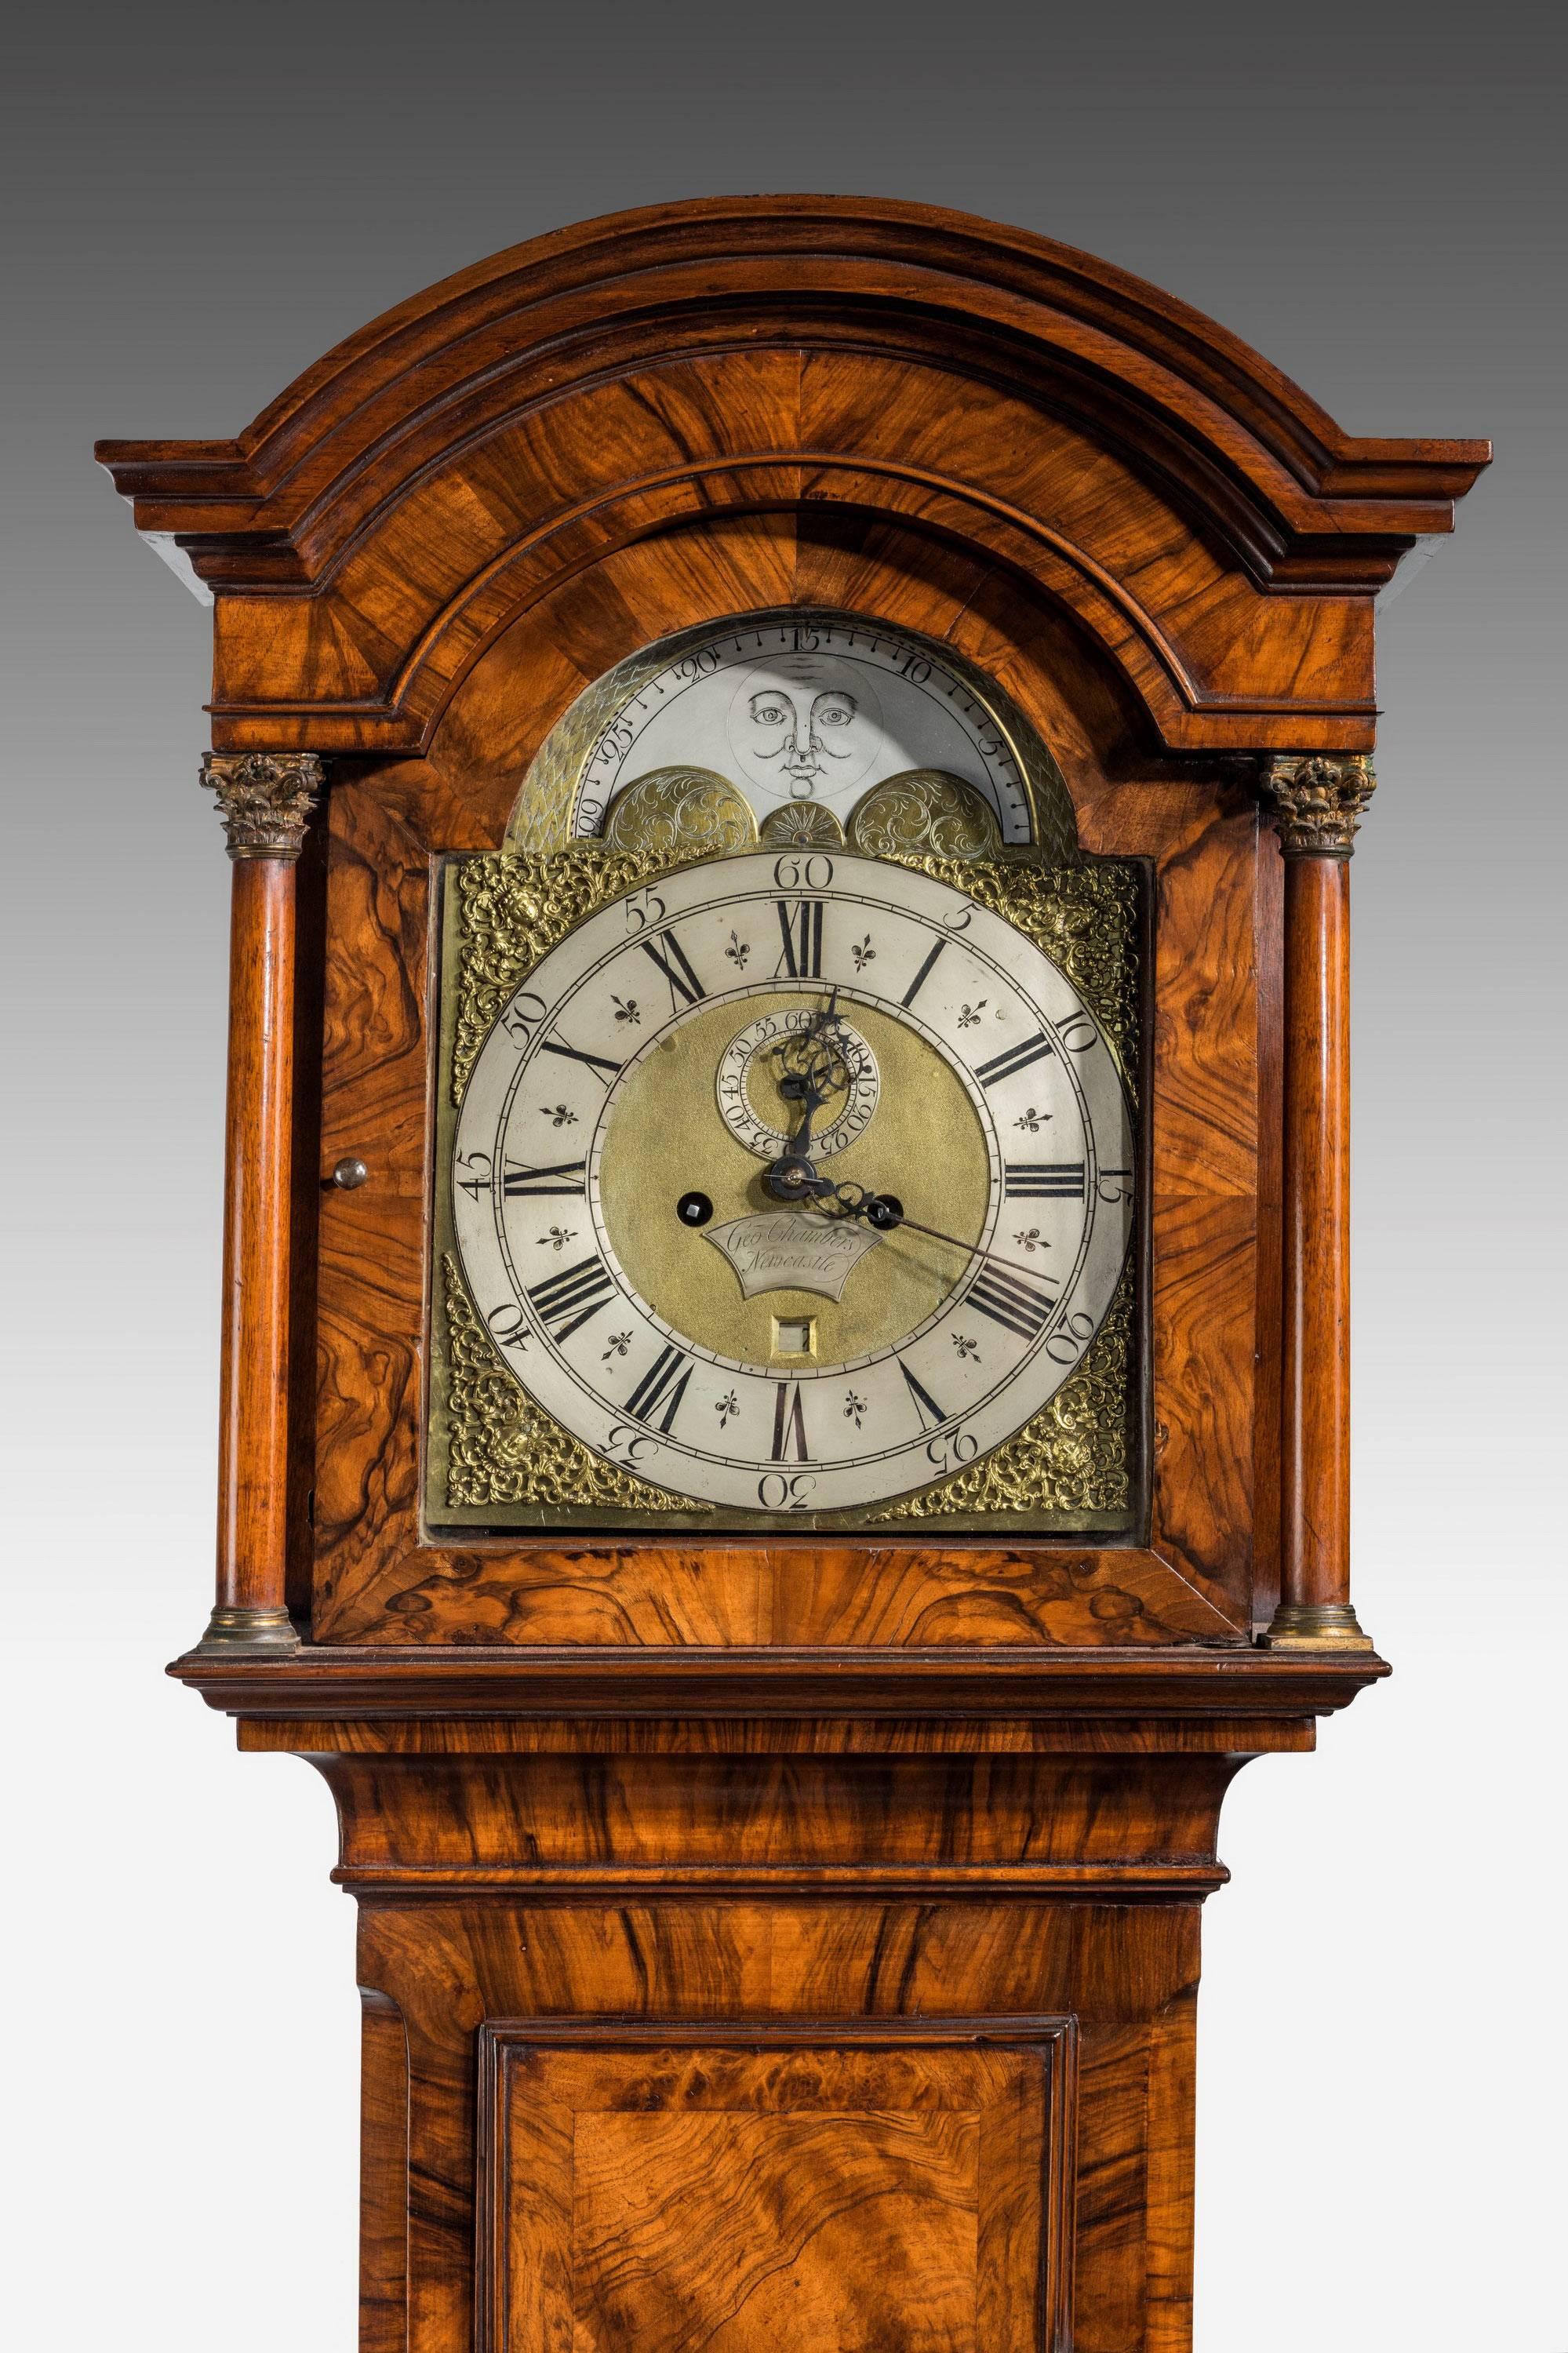 George III Period Longcase Clock by George Chambers of Newcastle In Excellent Condition In Peterborough, Northamptonshire